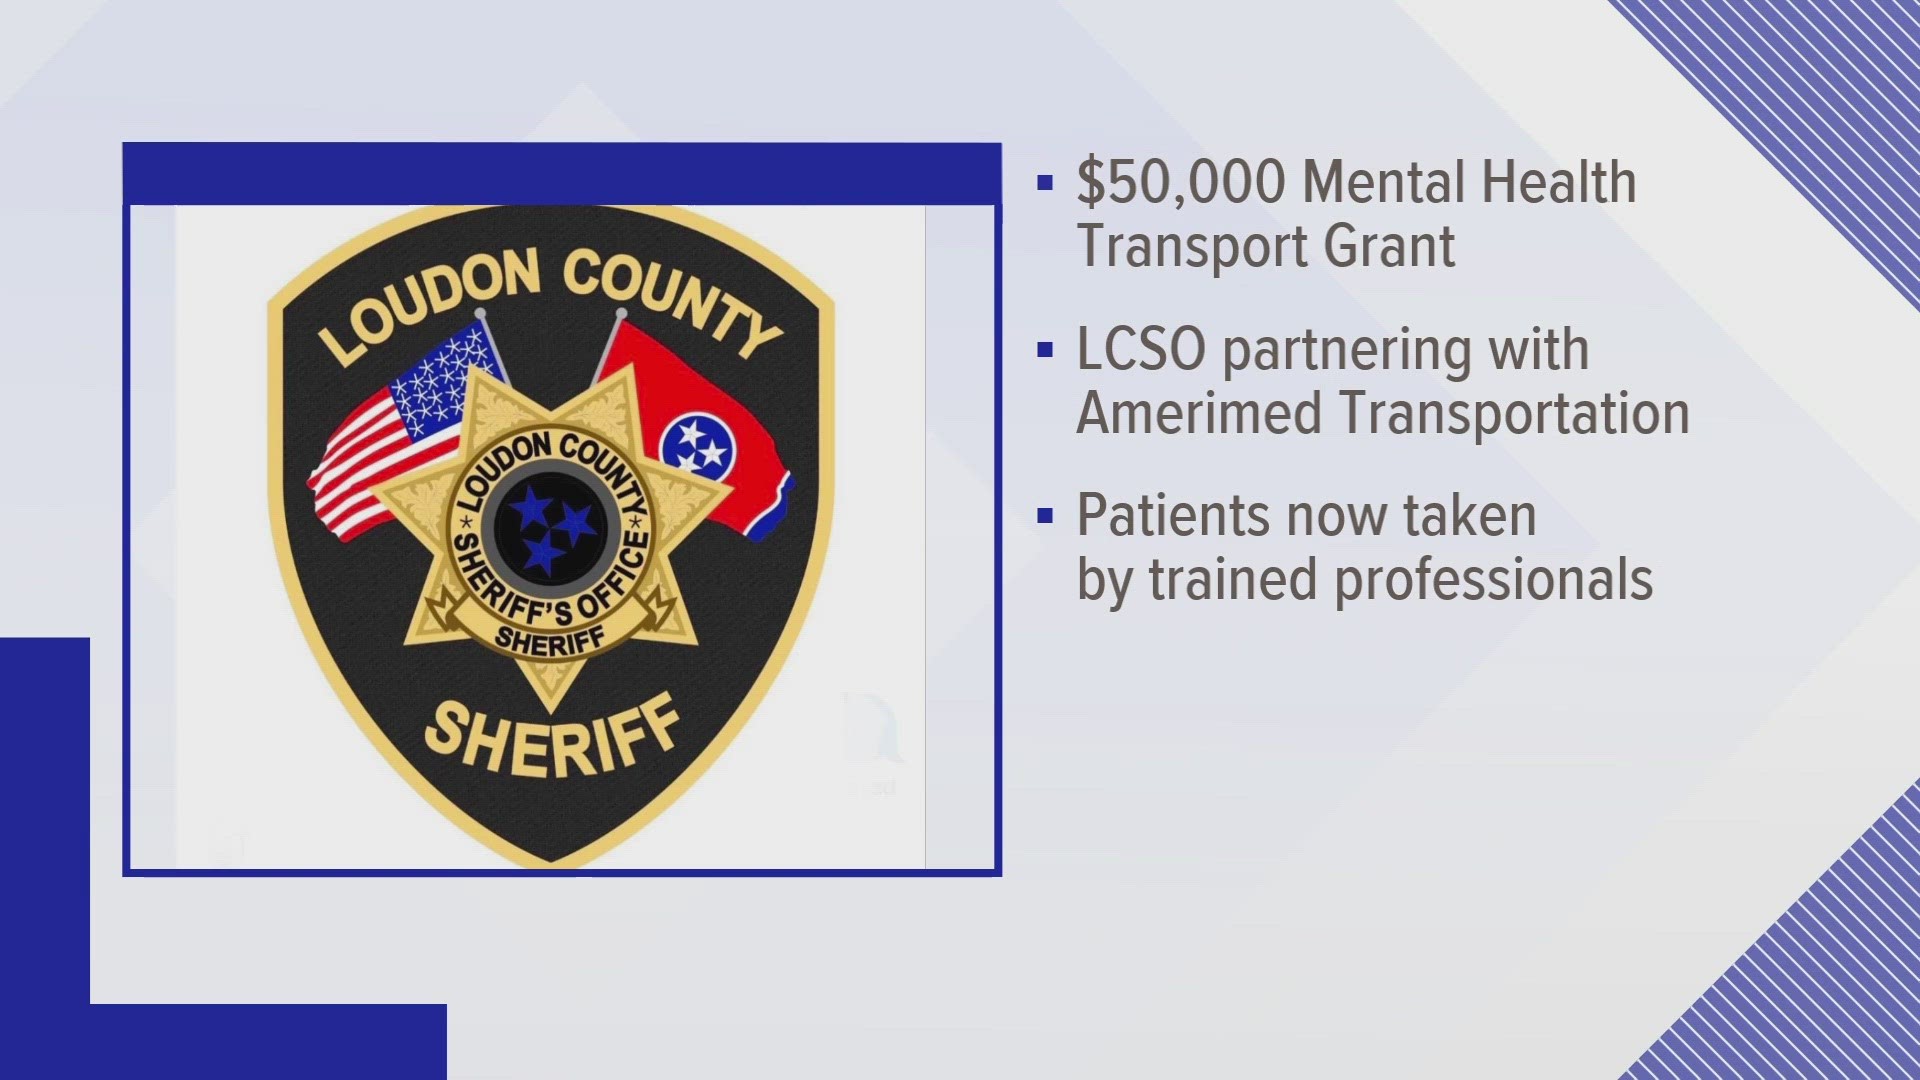 The grant was provided through the Tennessee Office of Criminal Justice Programs and is meant to provide better transportation for mentally ill patients.